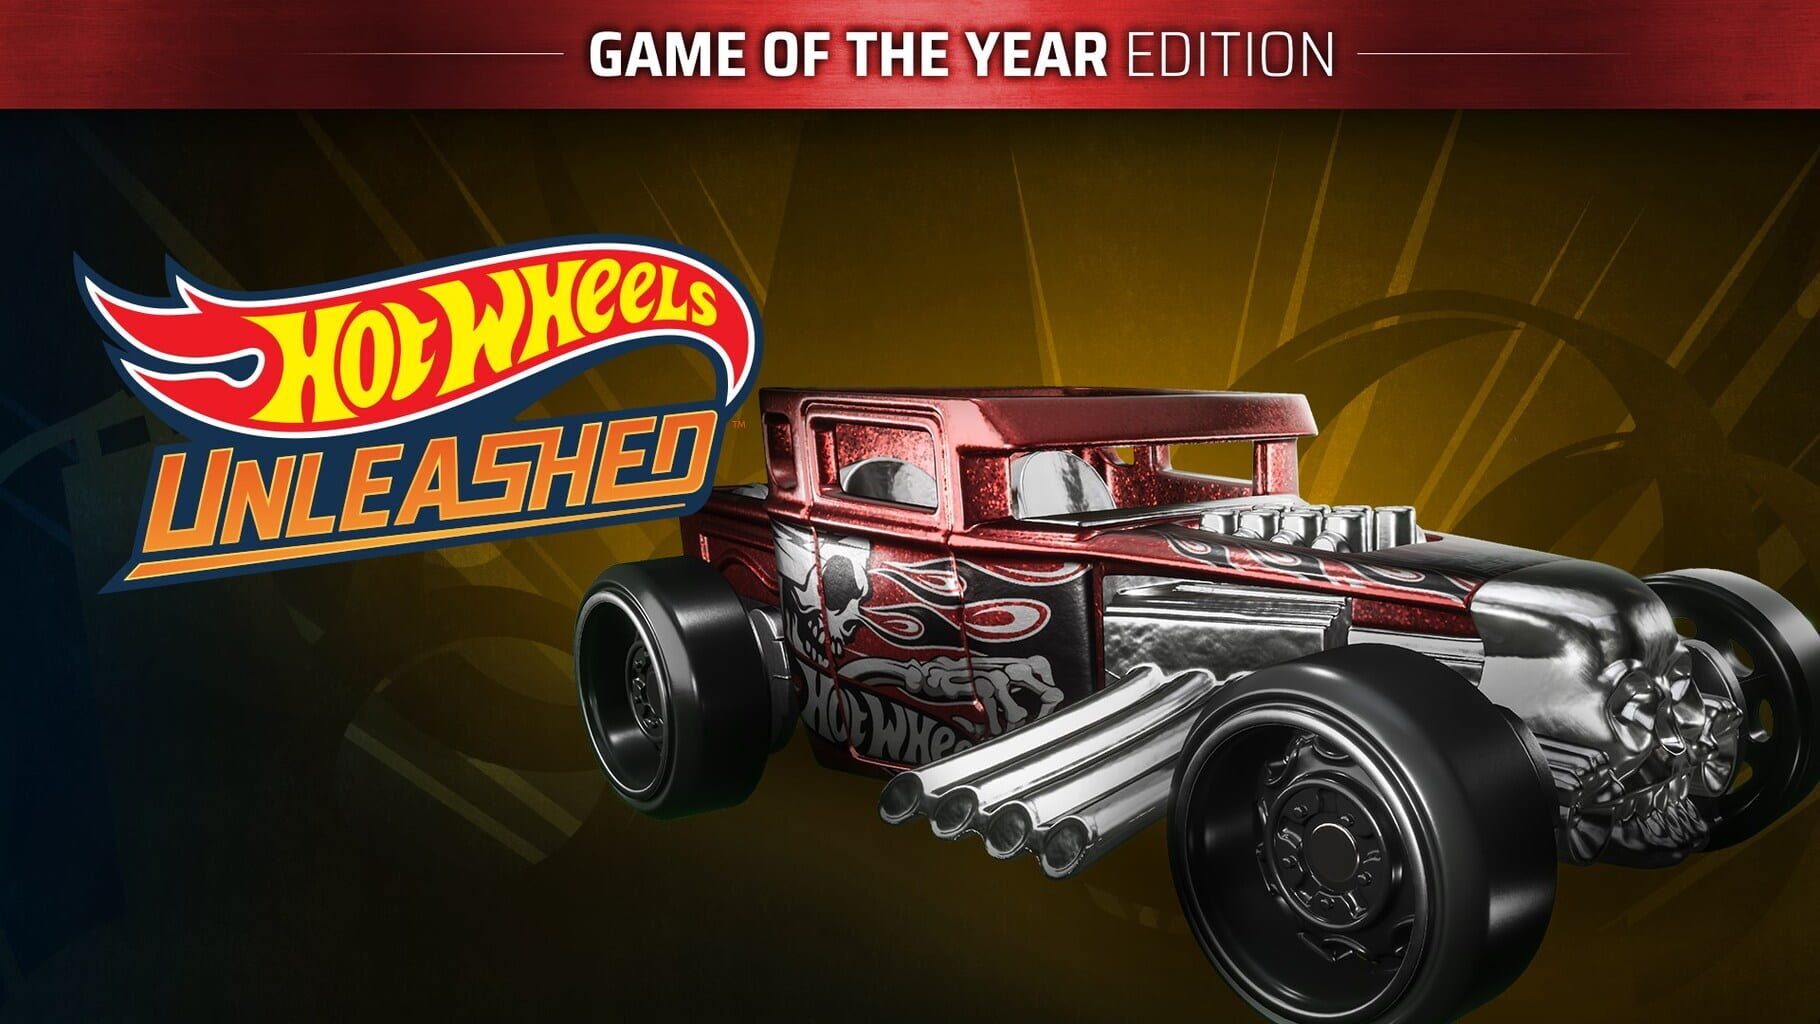 Hot Wheels Unleashed: Game of the Year Edition artwork